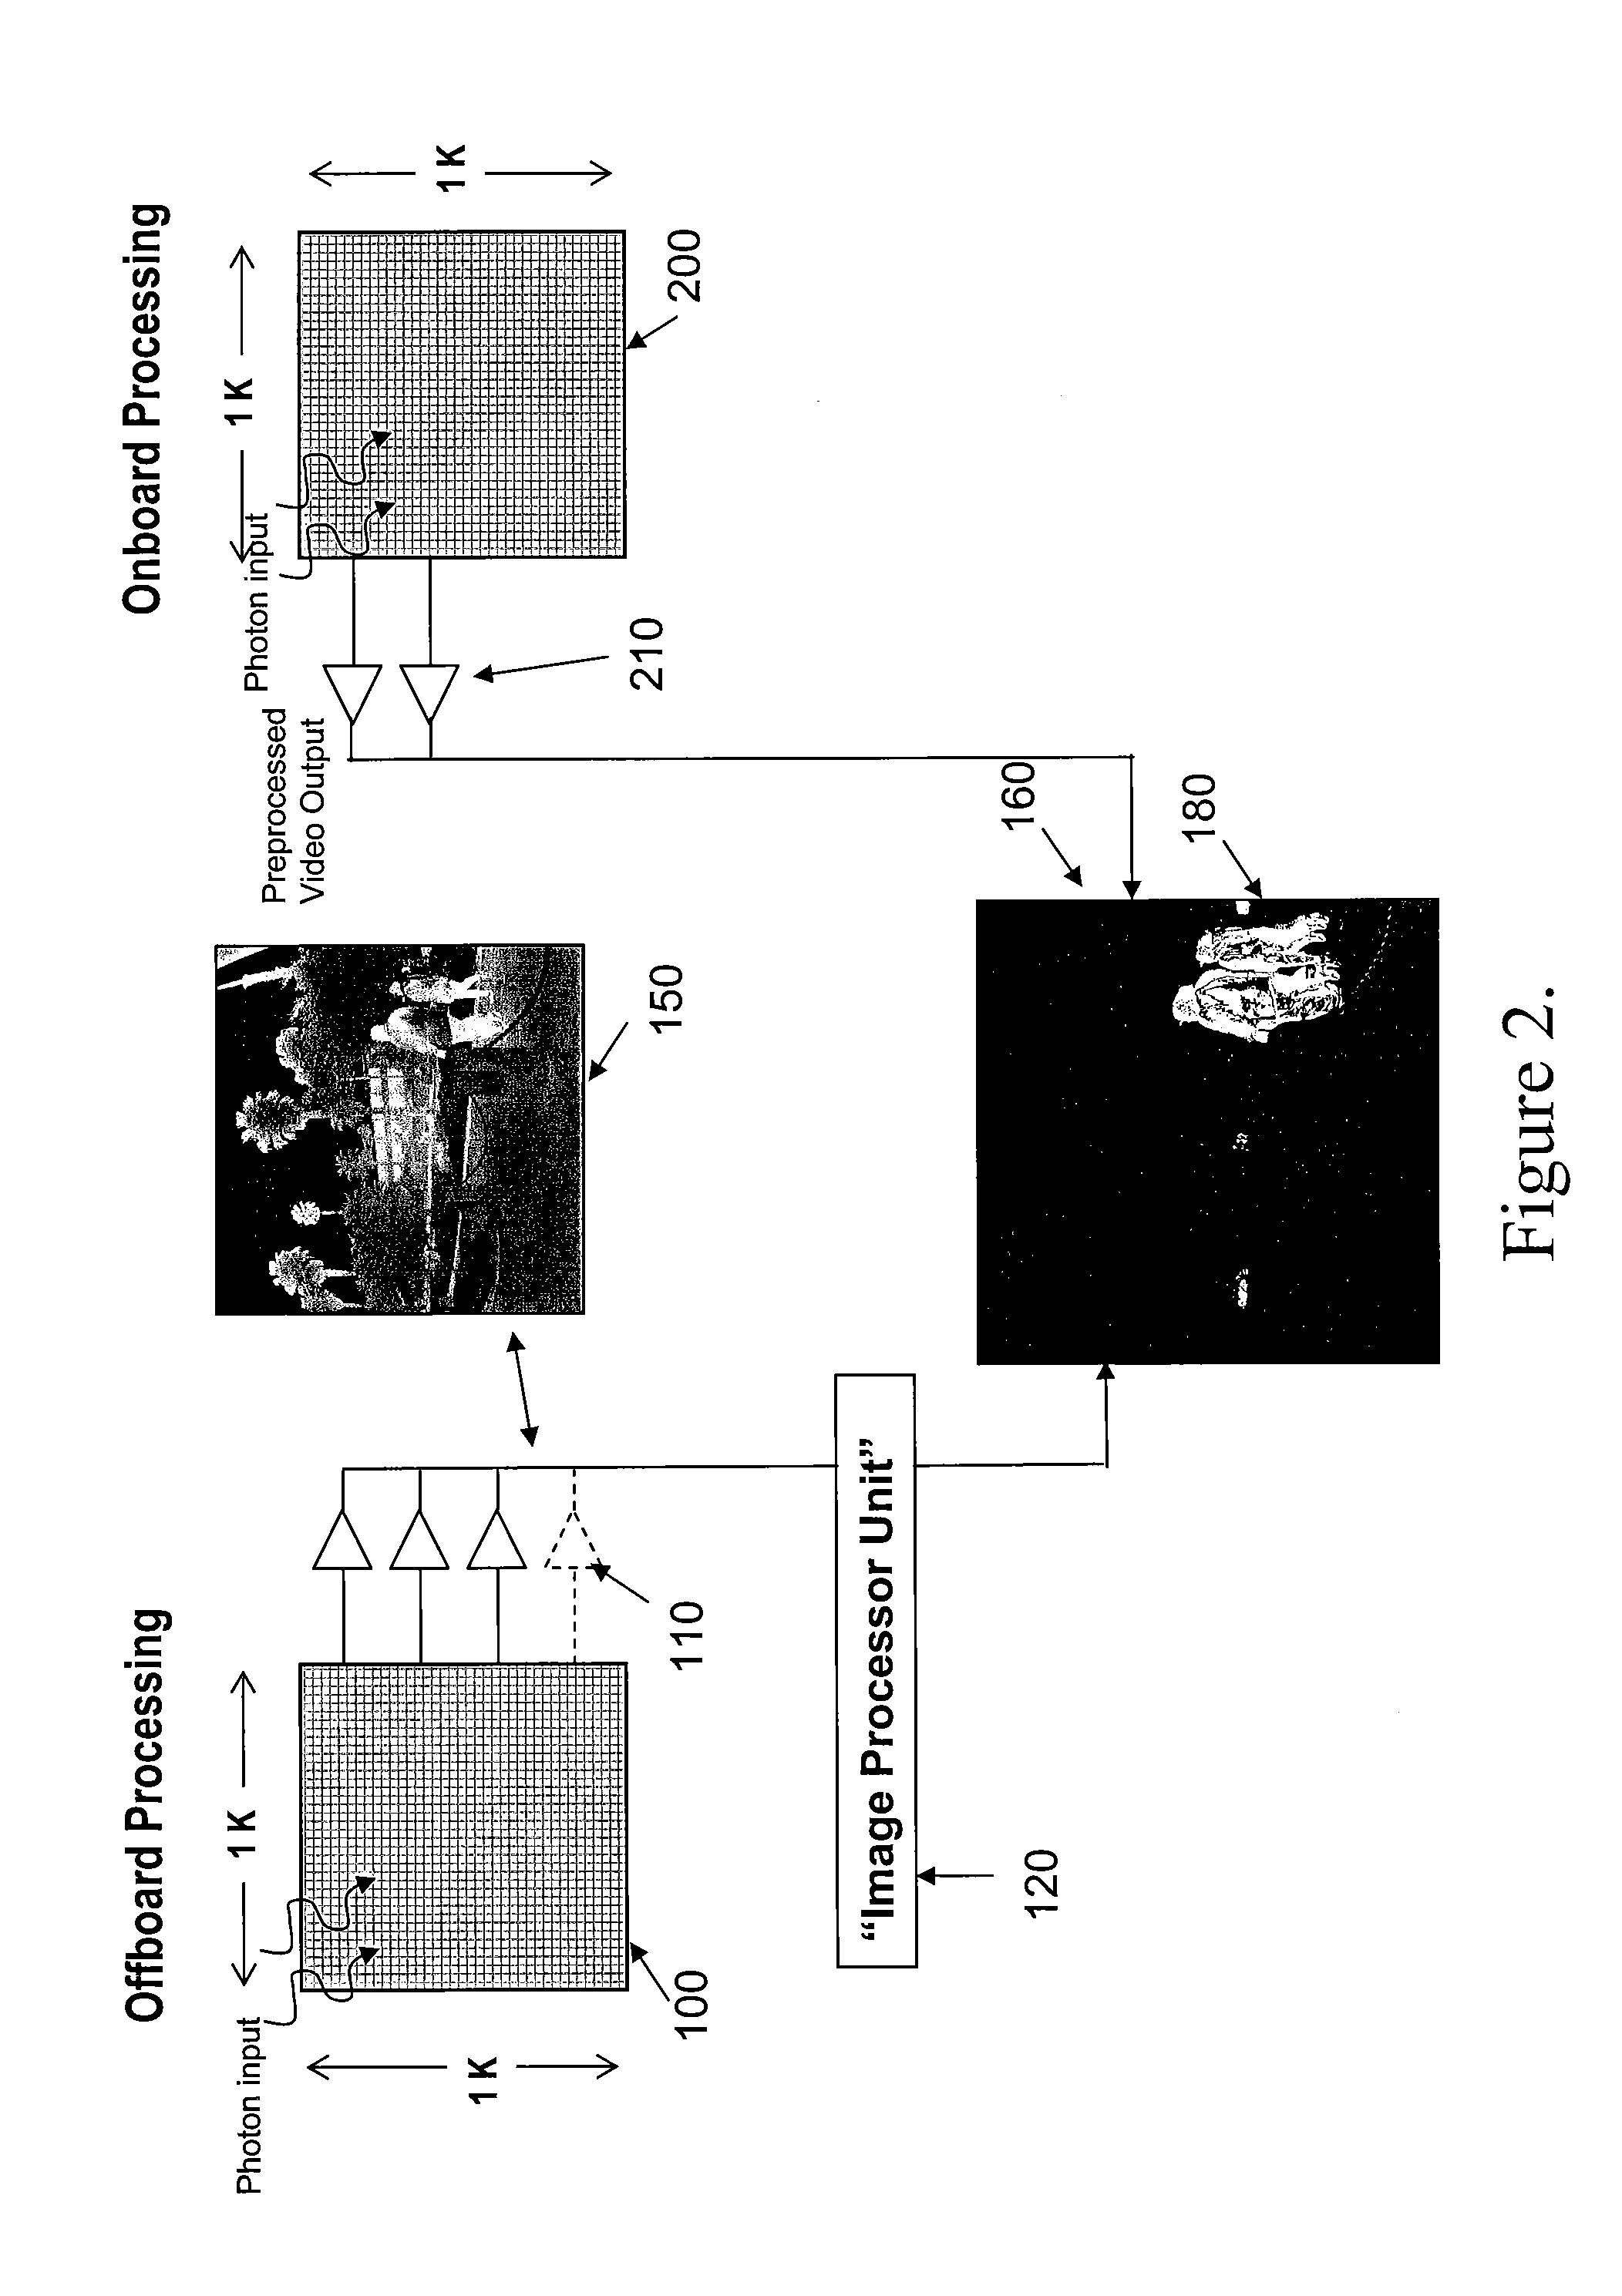 Imaging Detecting with Automated Sensing of an Object or Characteristic of that Object